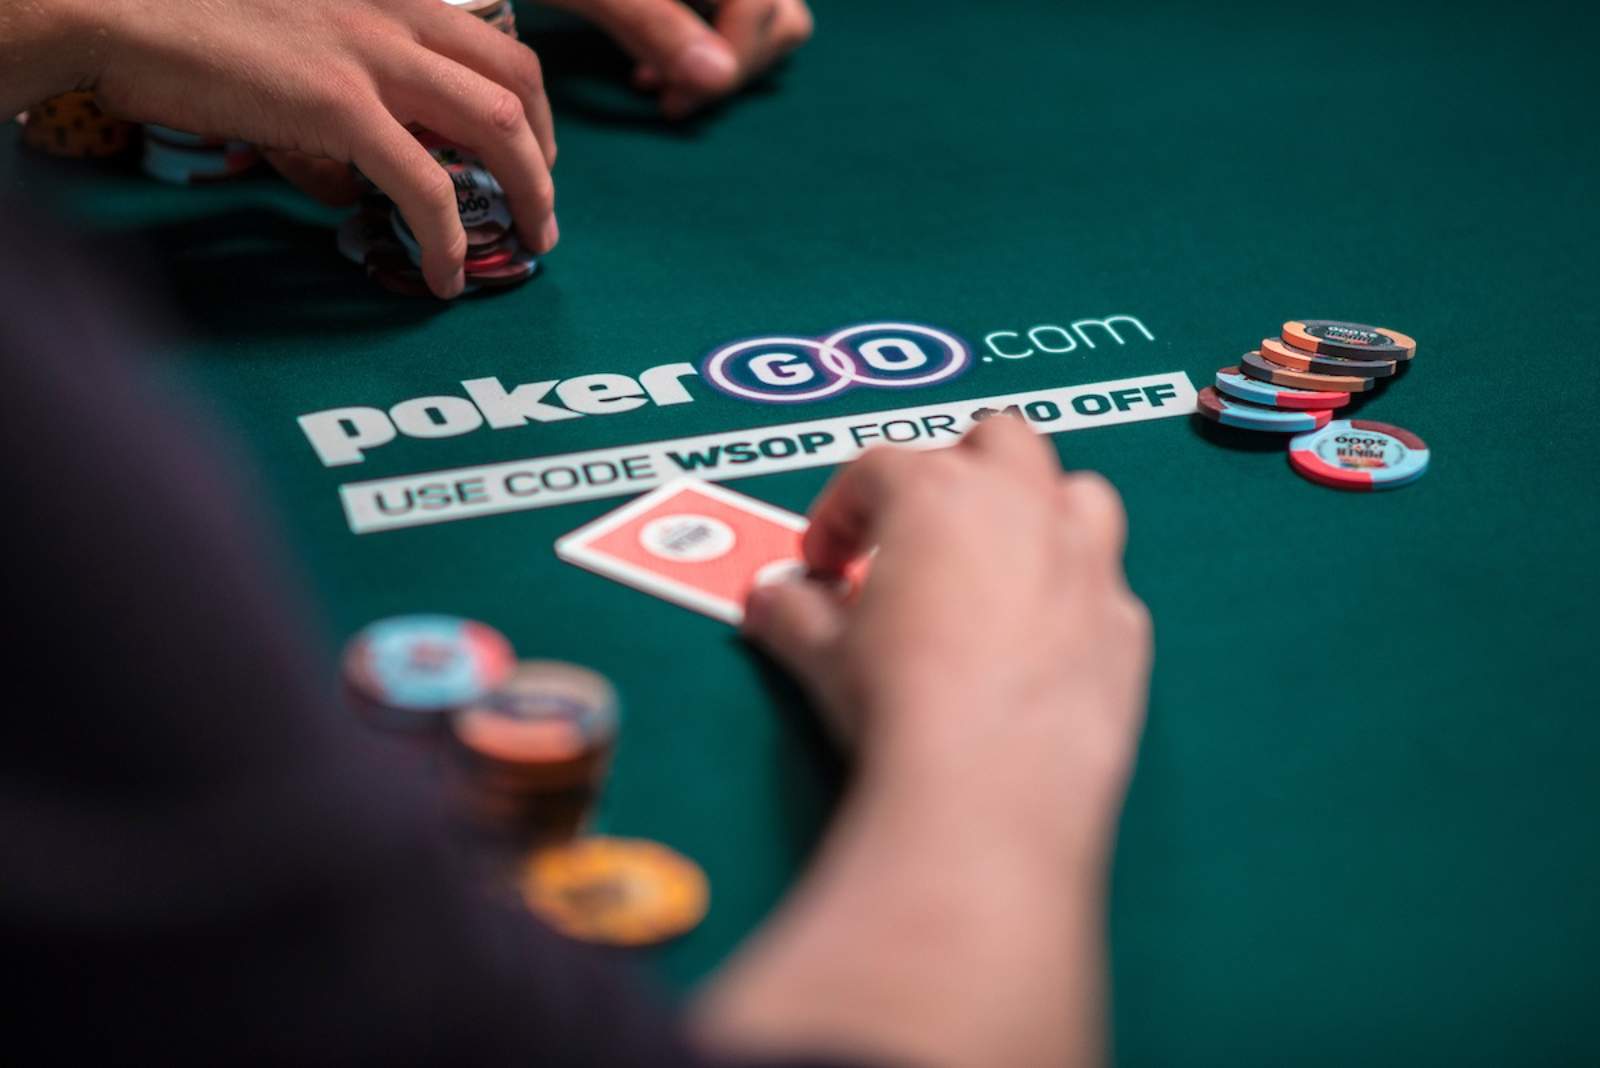 PokerGO Teams with WSOP for $10,000 Subscriber Freeroll